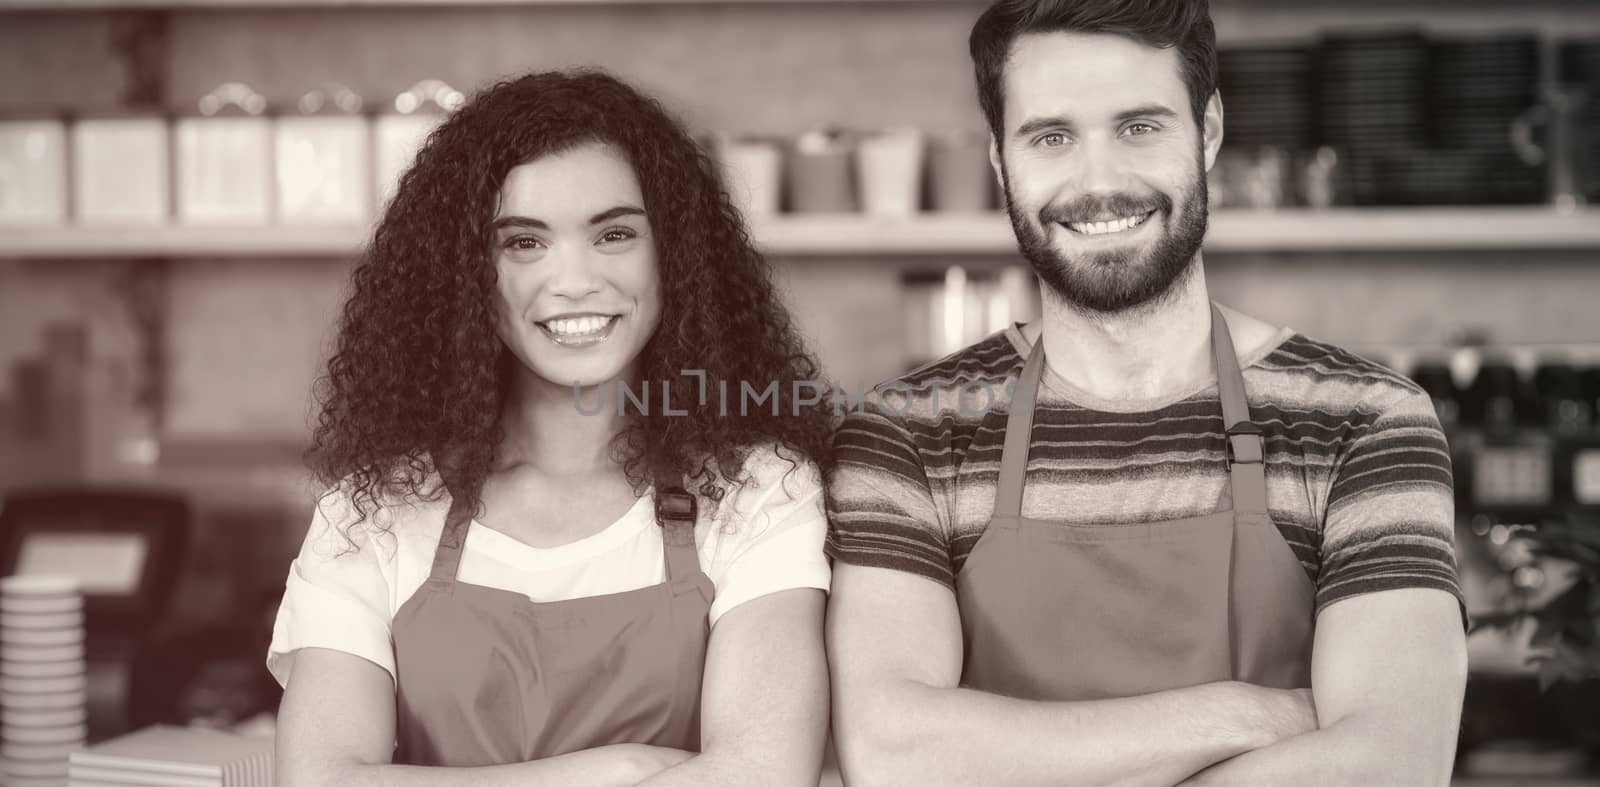 Portrait of smiling waiter and waitress standing at counter in cafe